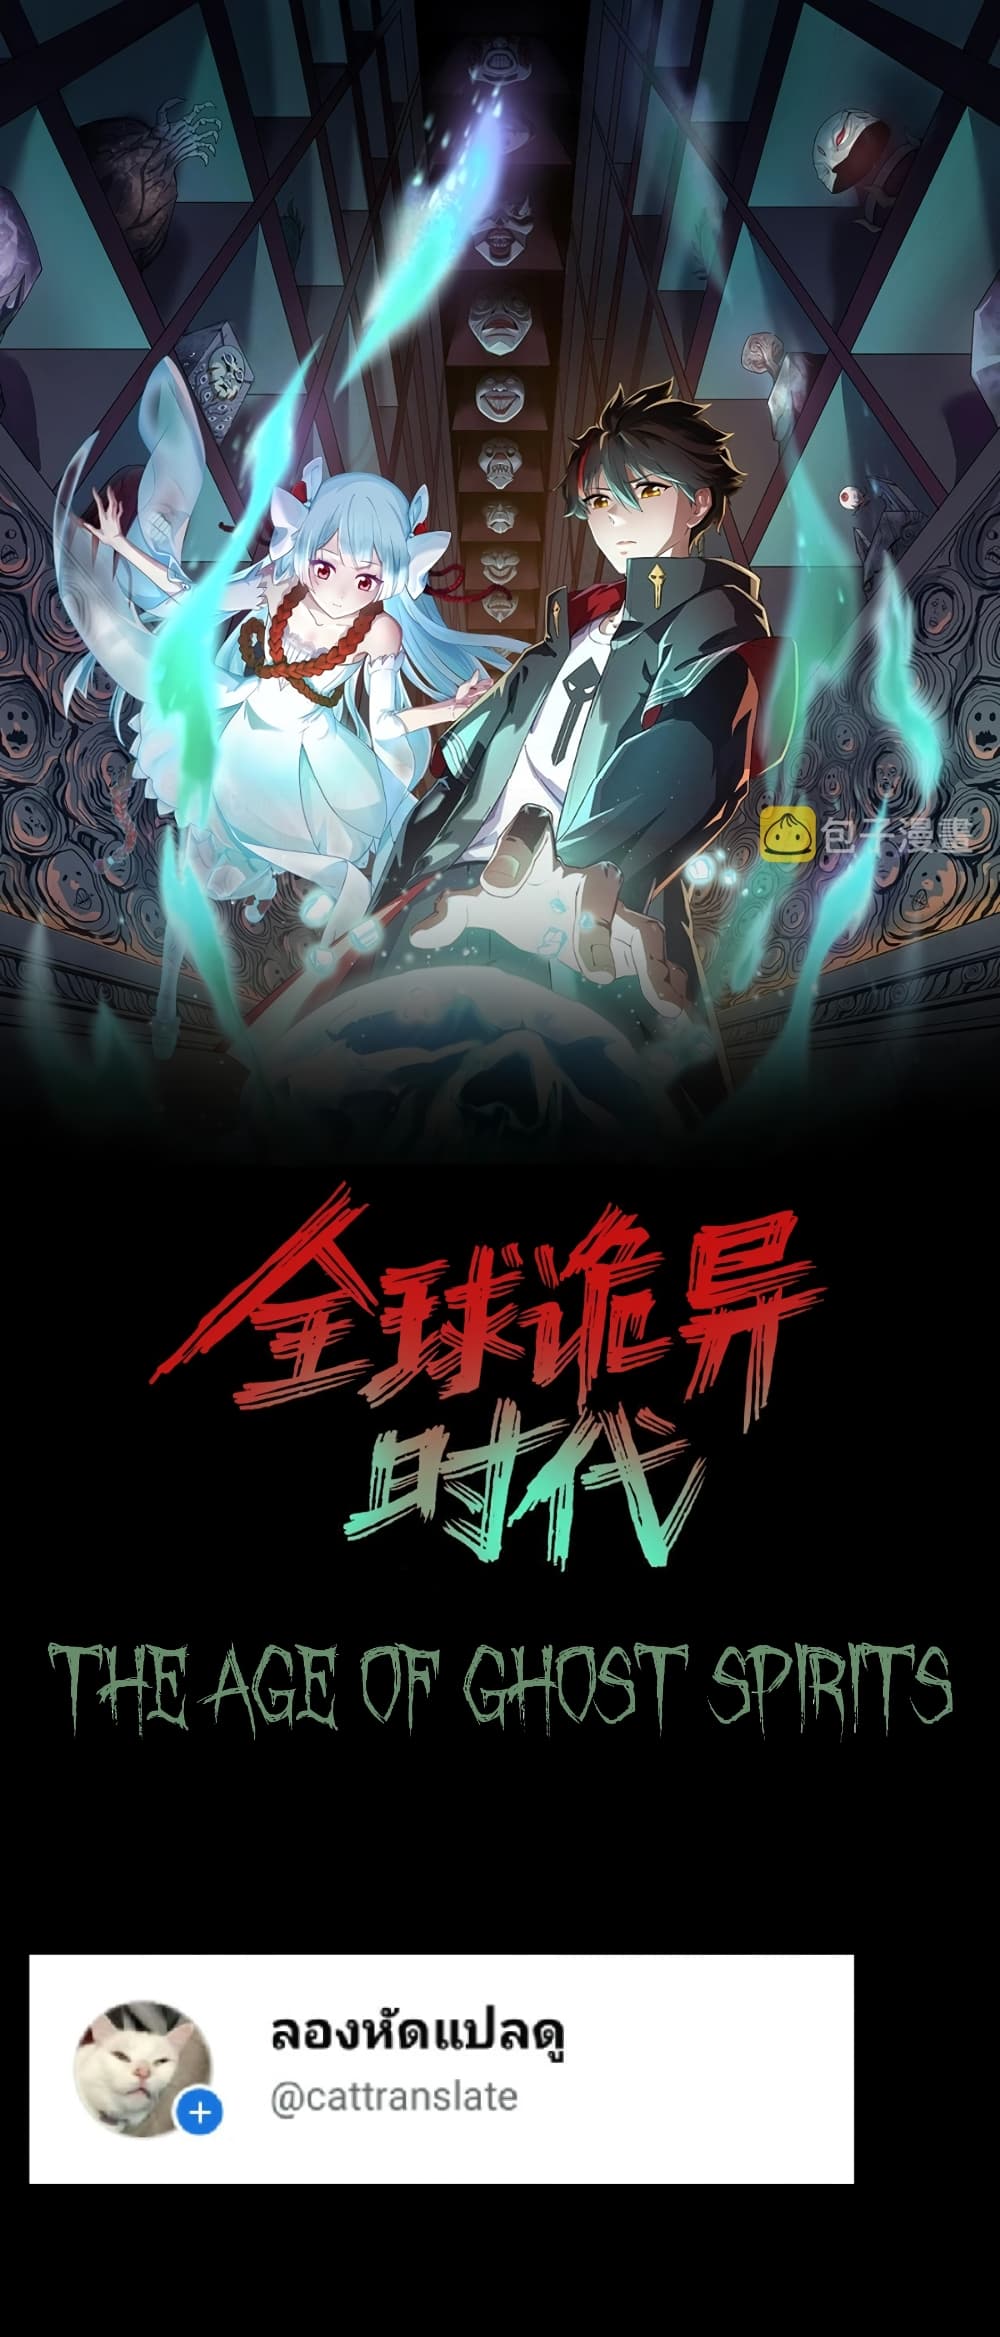 The Age of Ghost Spirits à¸à¸­à¸à¸à¸µà¹ 21 (1)